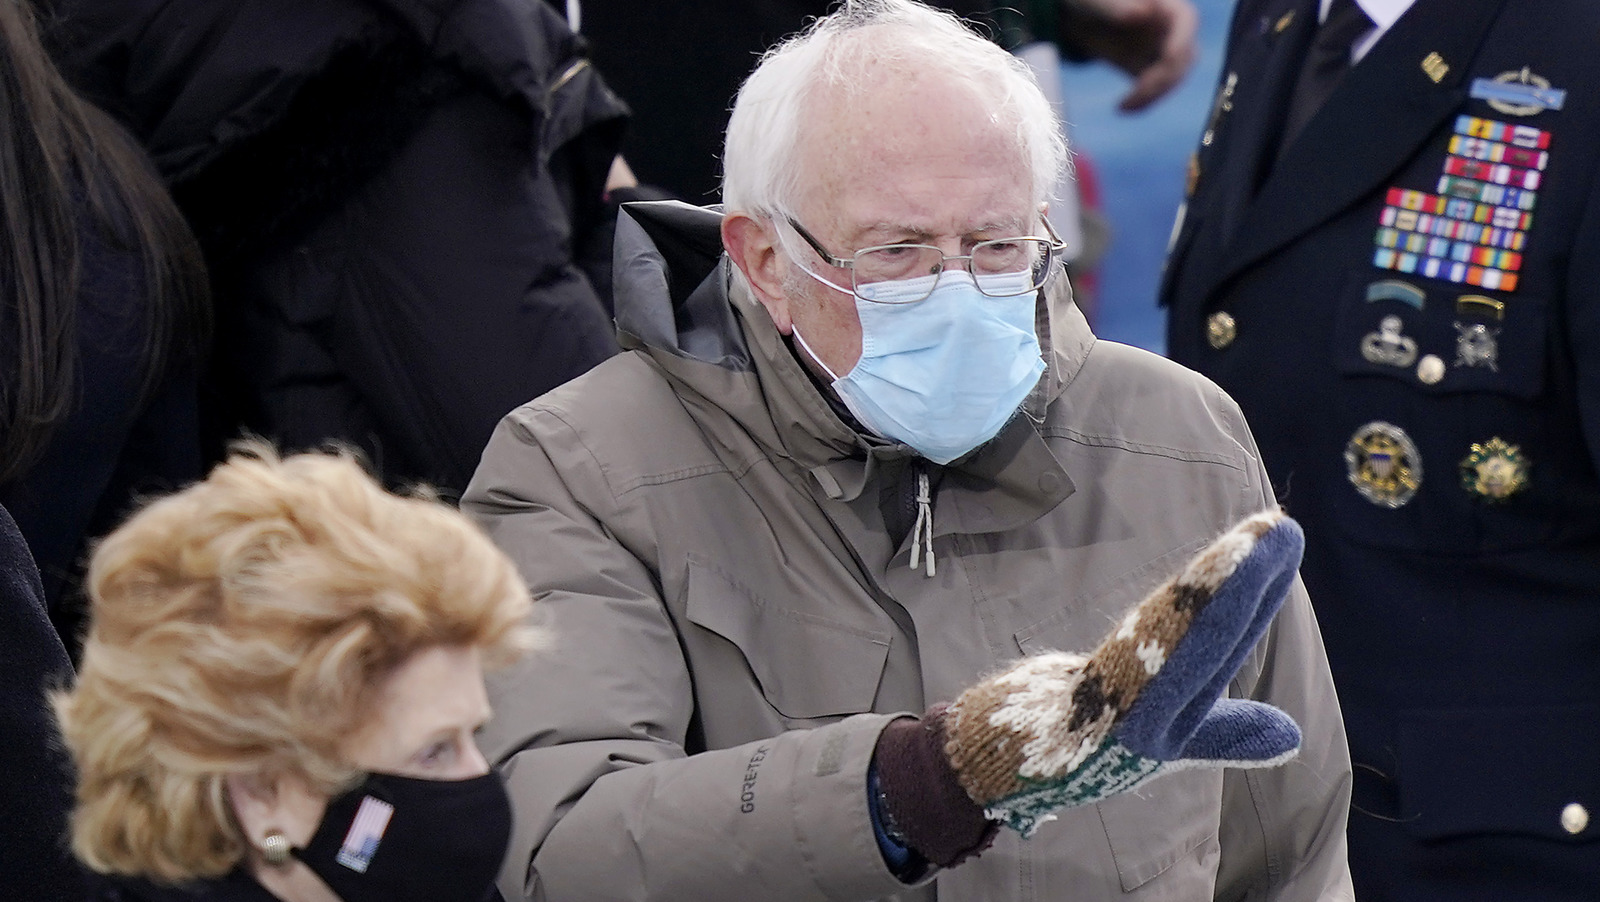 Bernie Sanders Has Some Thoughts About His Mittens Going Viral